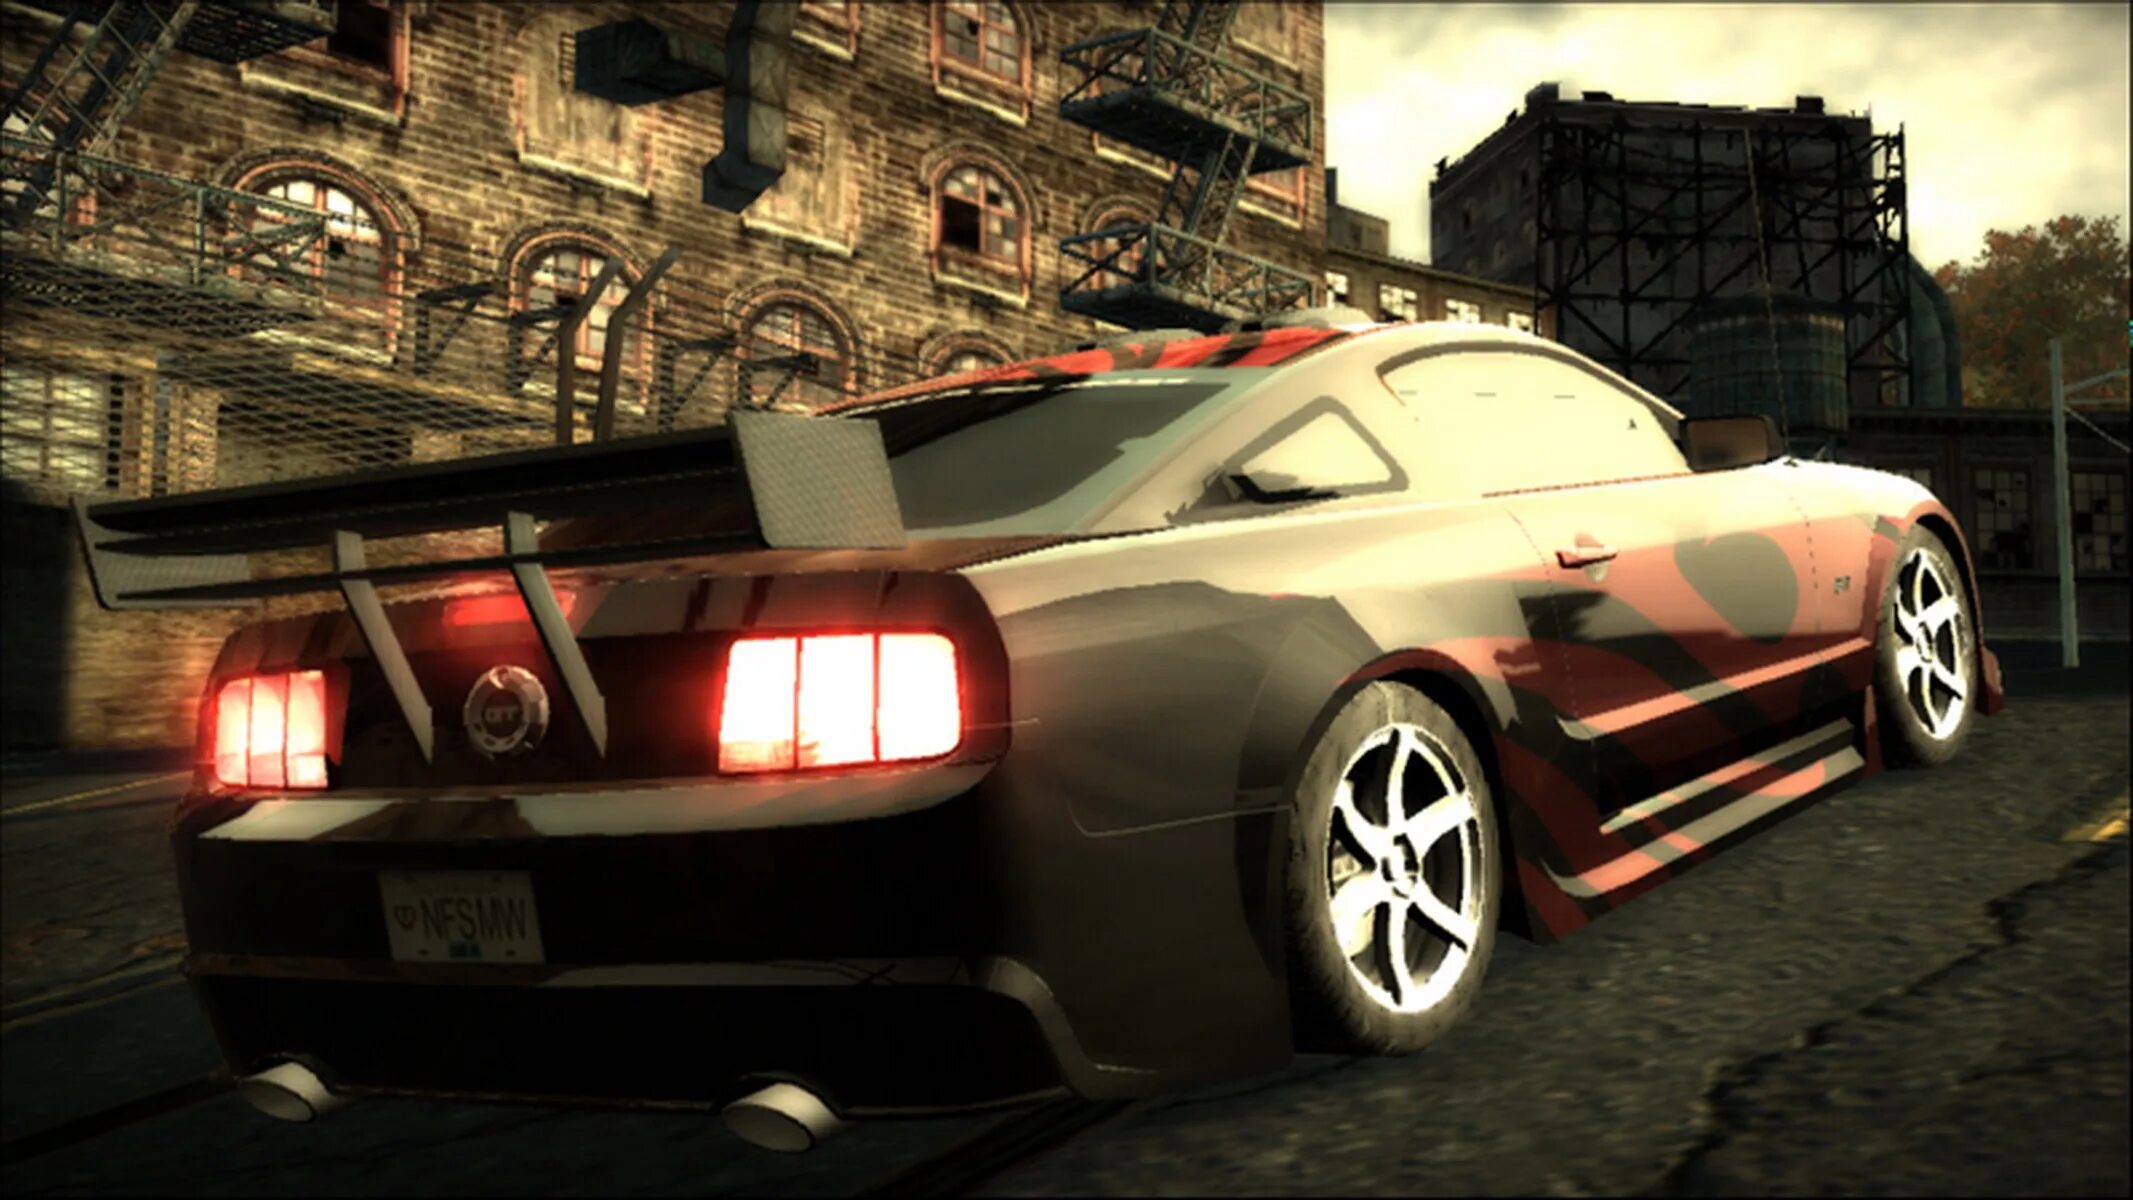 Машина рога NFS most wanted. Мустанг 2005 NFS. NFS most wanted 2005 машины. Мустанг most wanted 2005. Машины в игре most wanted